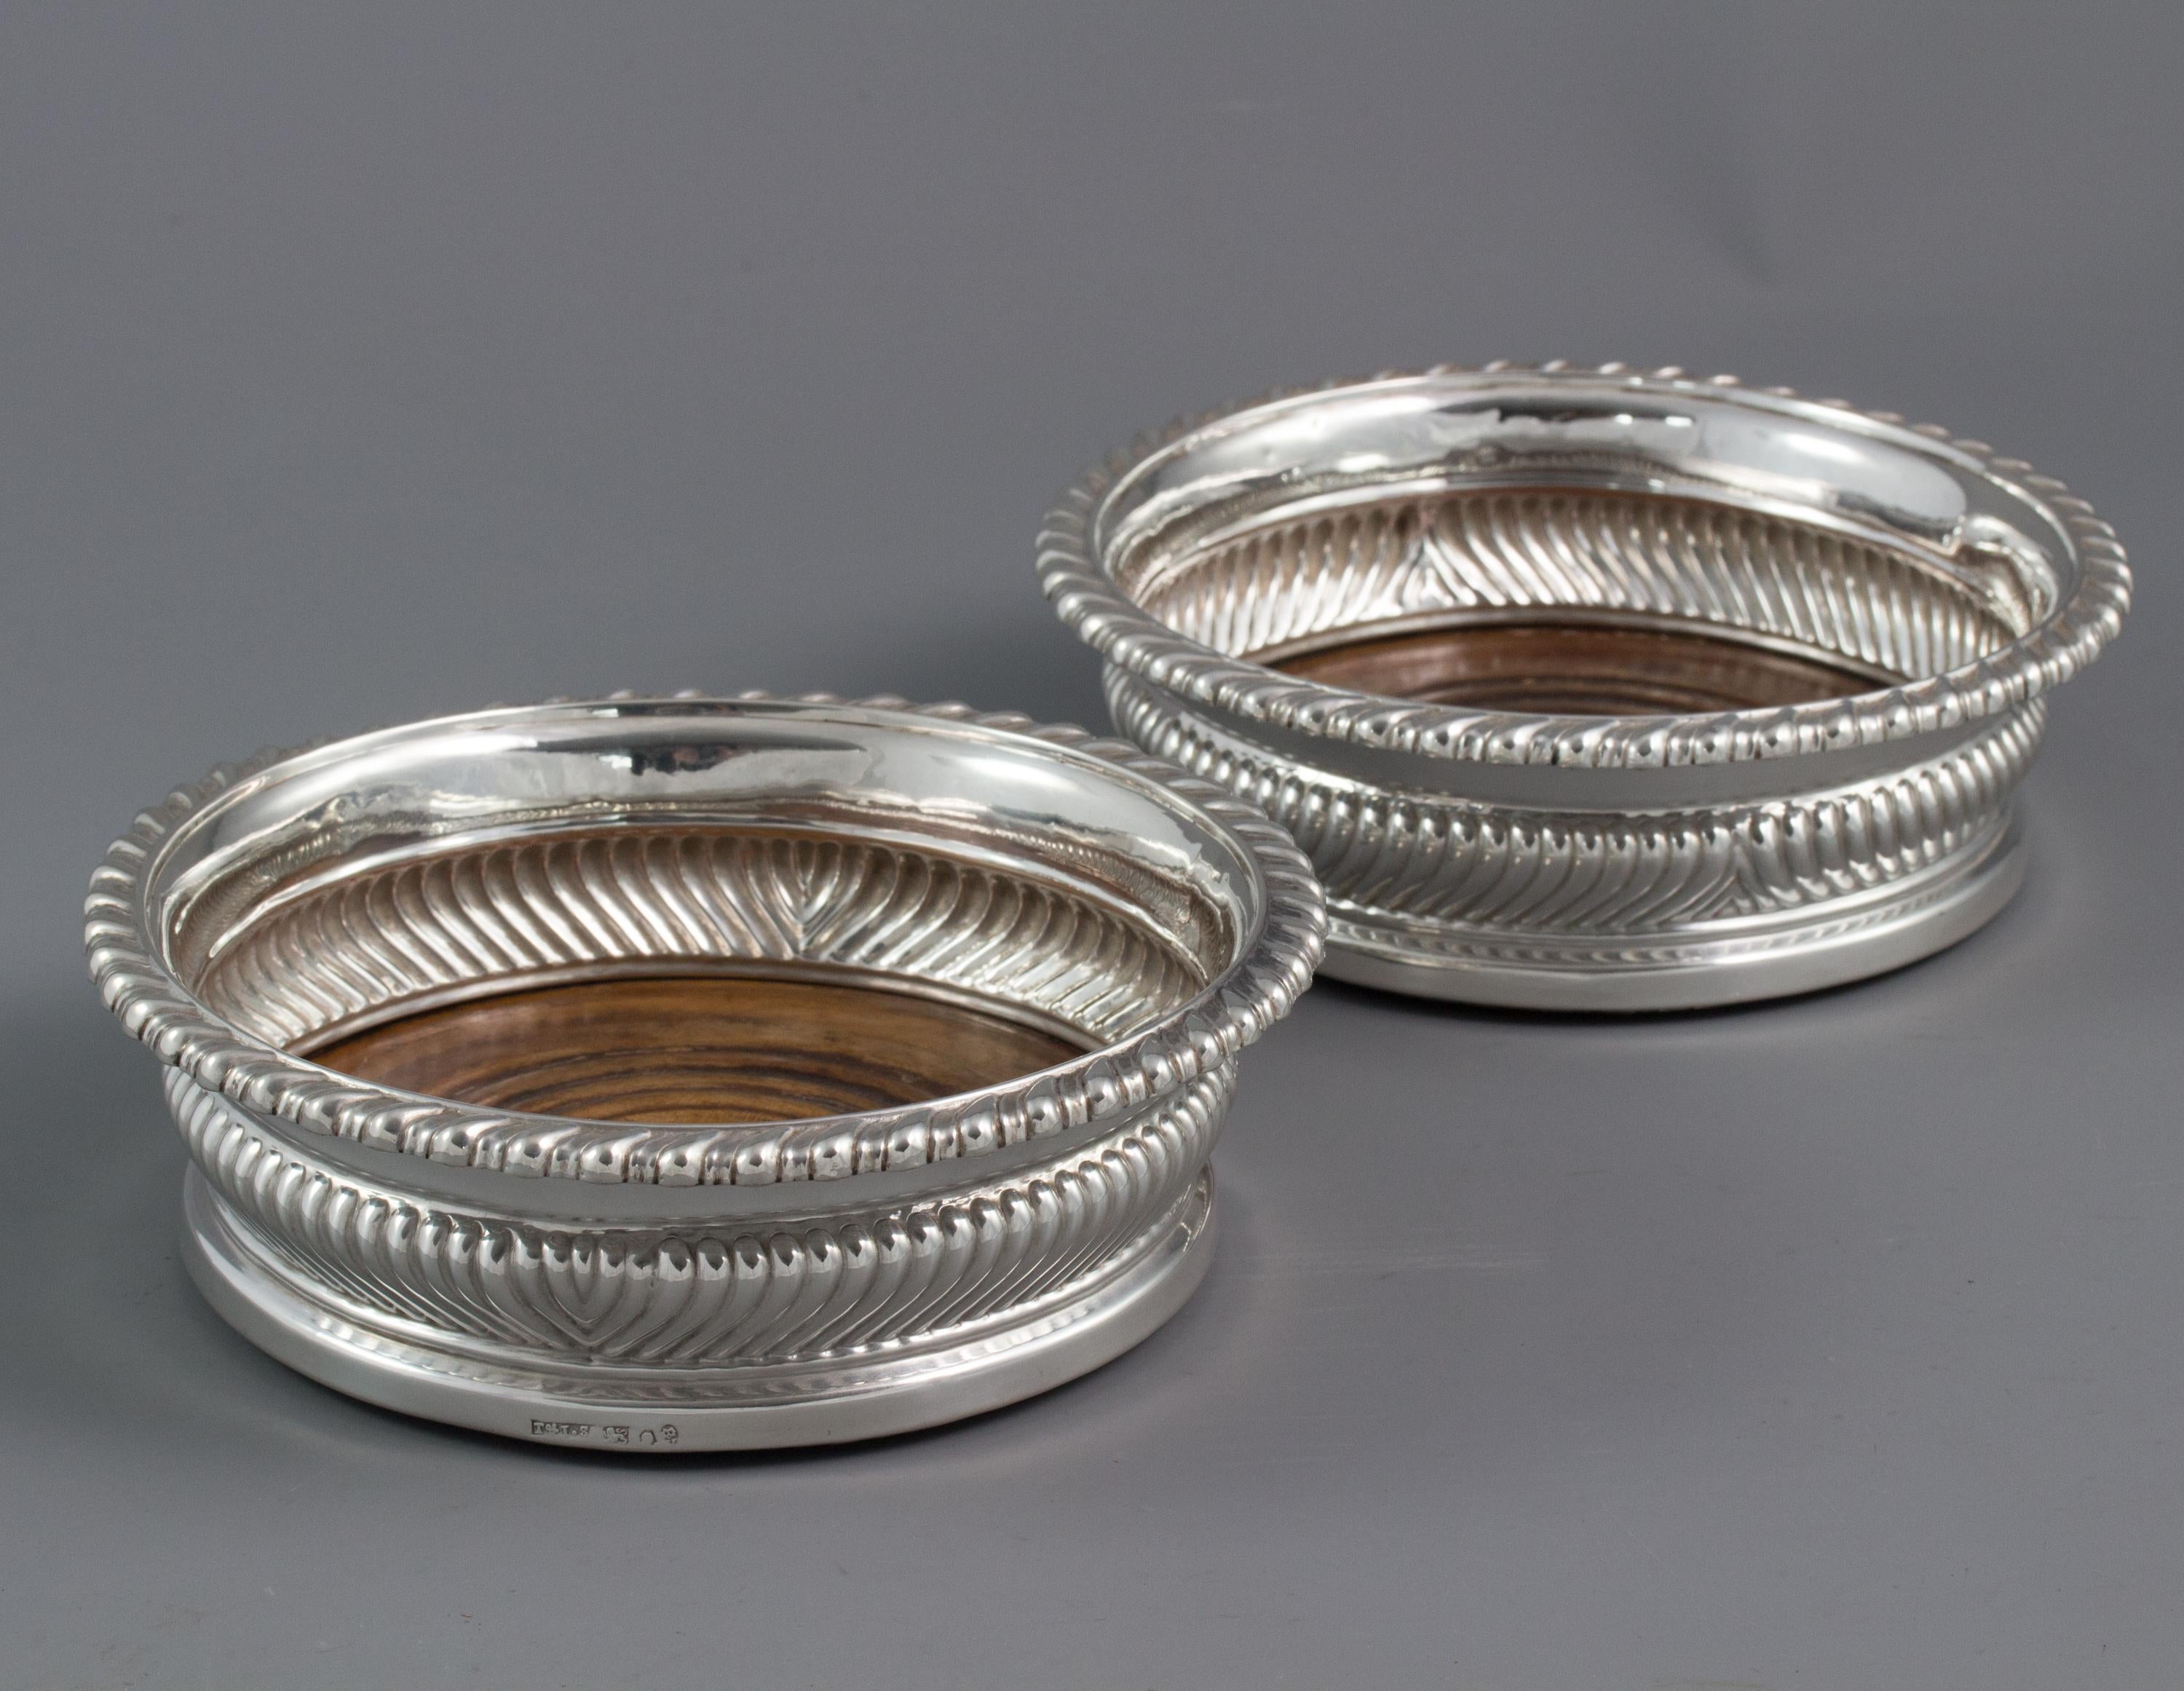 A very fine large pair of George III silver wine coasters, of circular form with half fluted shaped sides rising to a gadrooned rim. Turned wooden bases inset with a silver button engraved with a crest. The bases are lined with baize